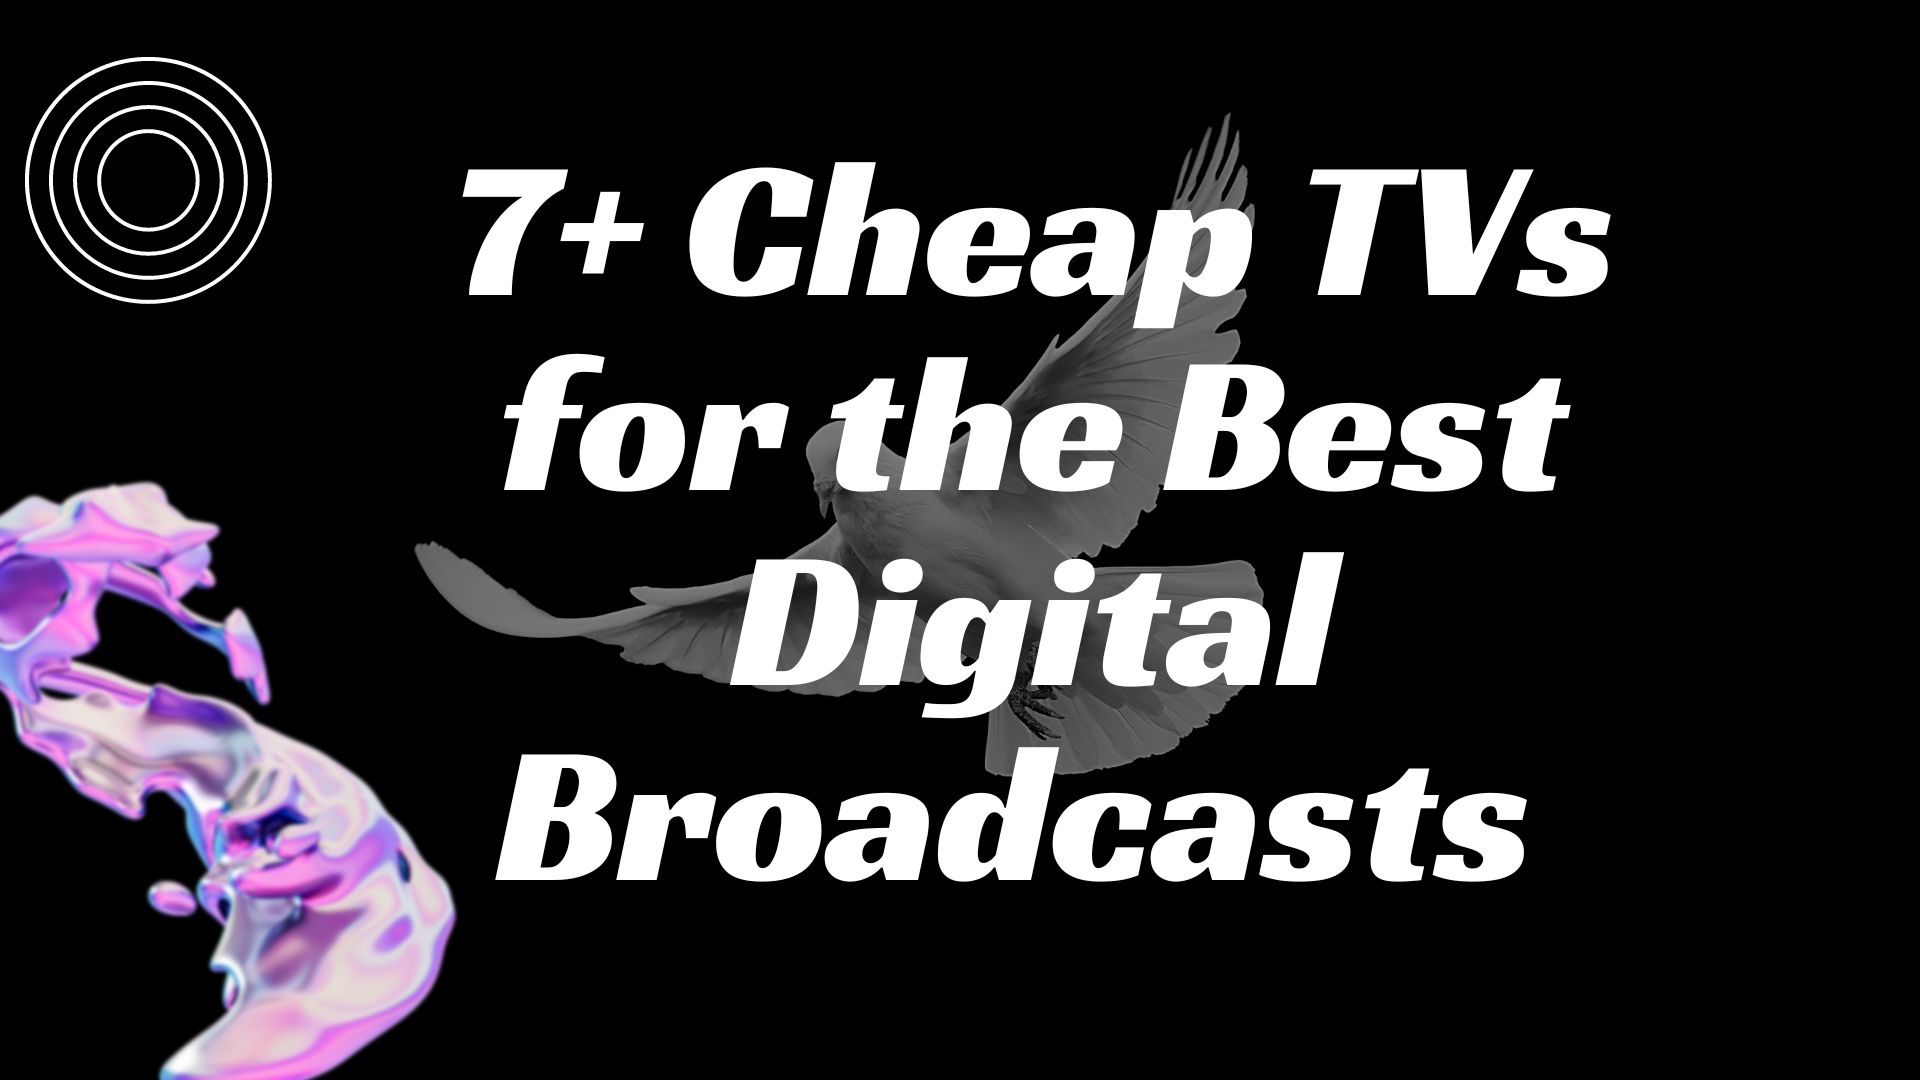 7+ Cheap TVs for the Best Digital Broadcasts